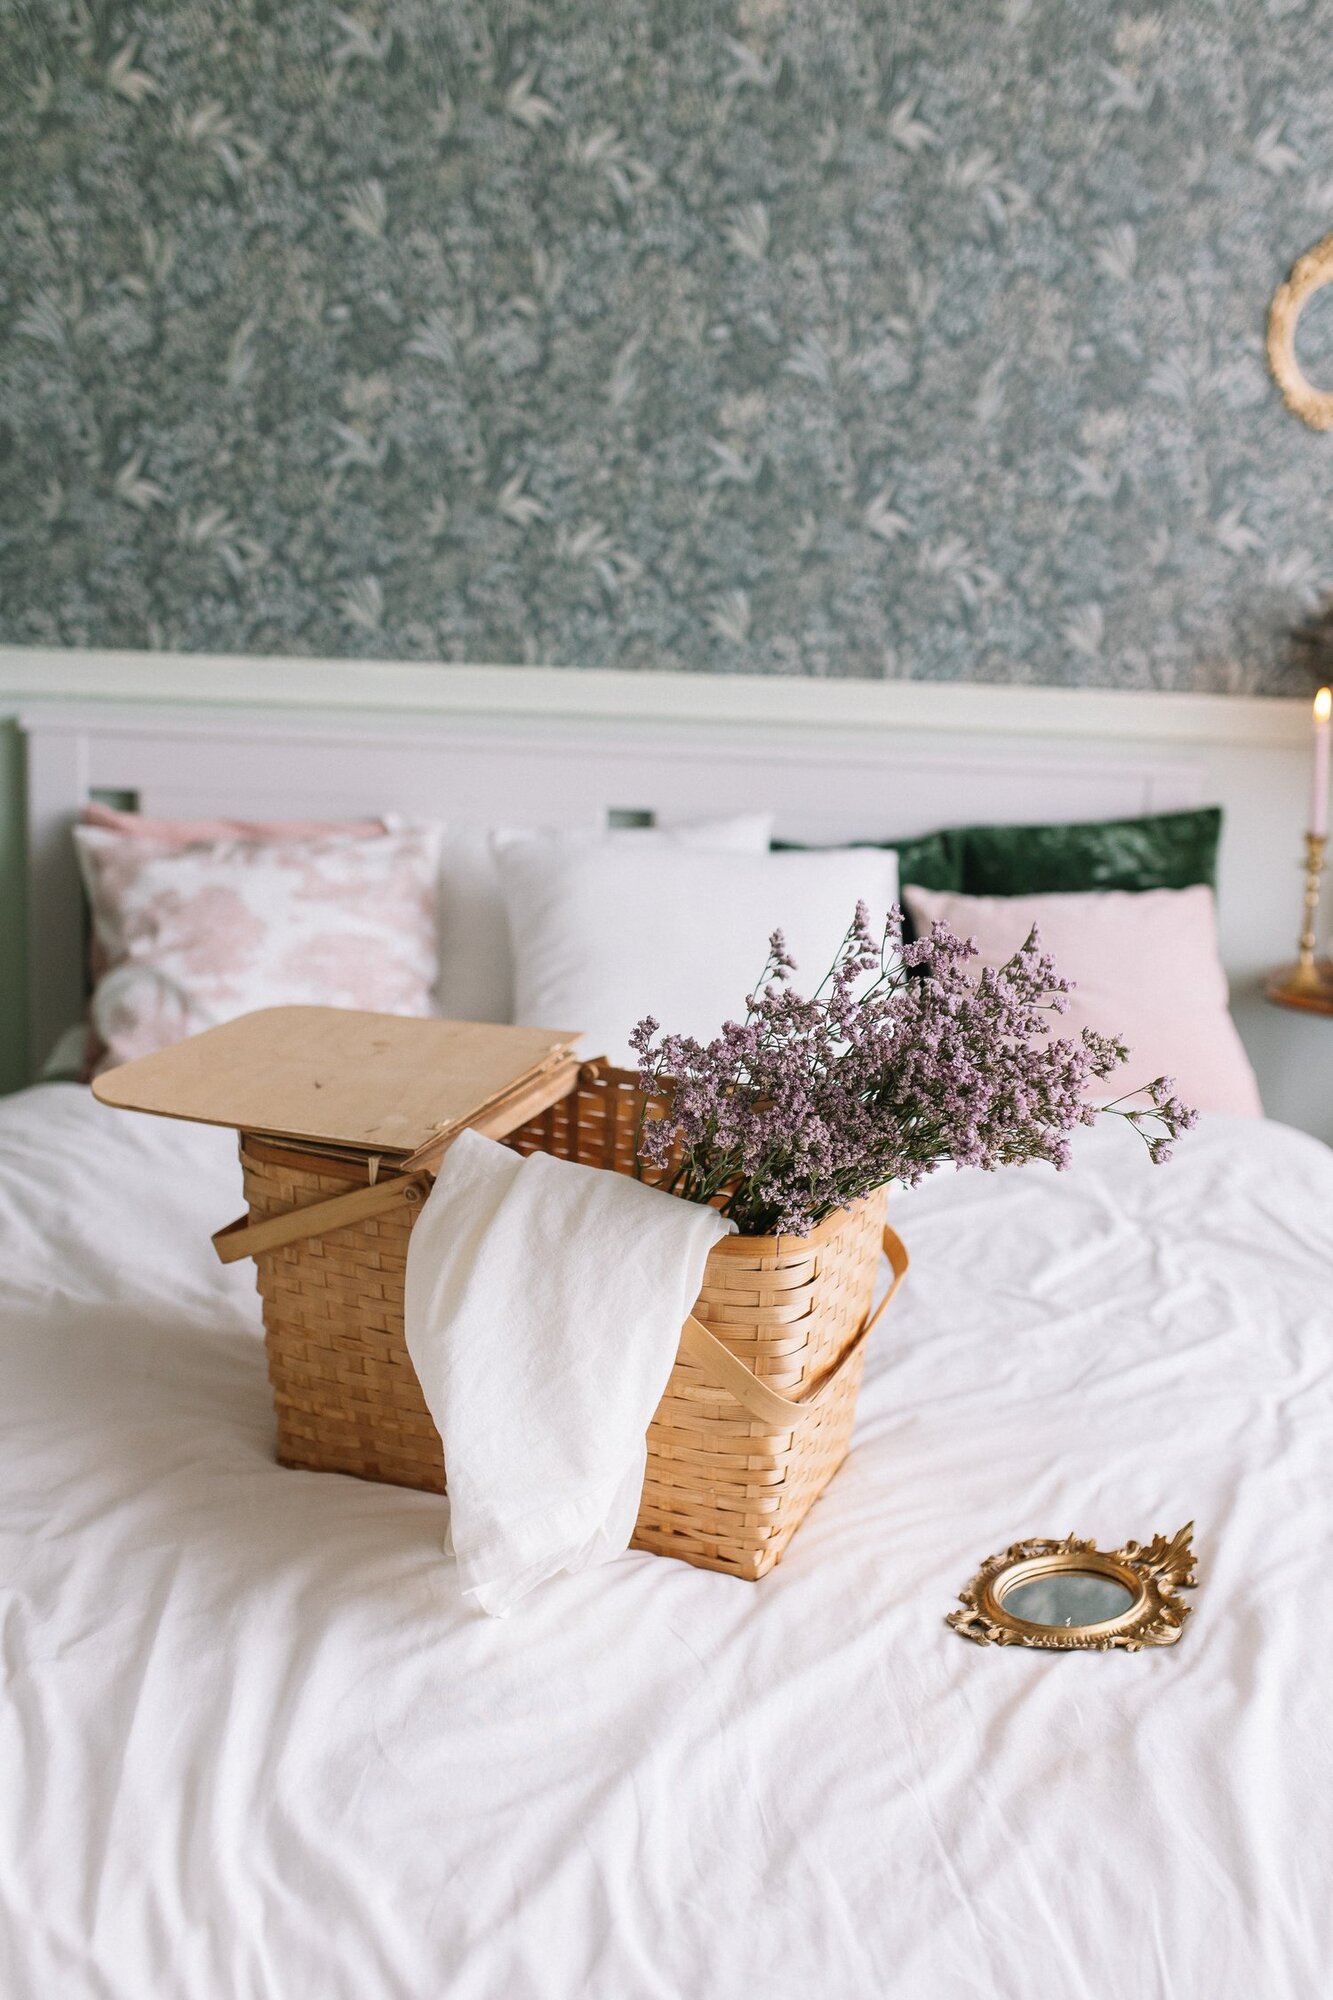 Wicker basket with lavender on a white modern bed